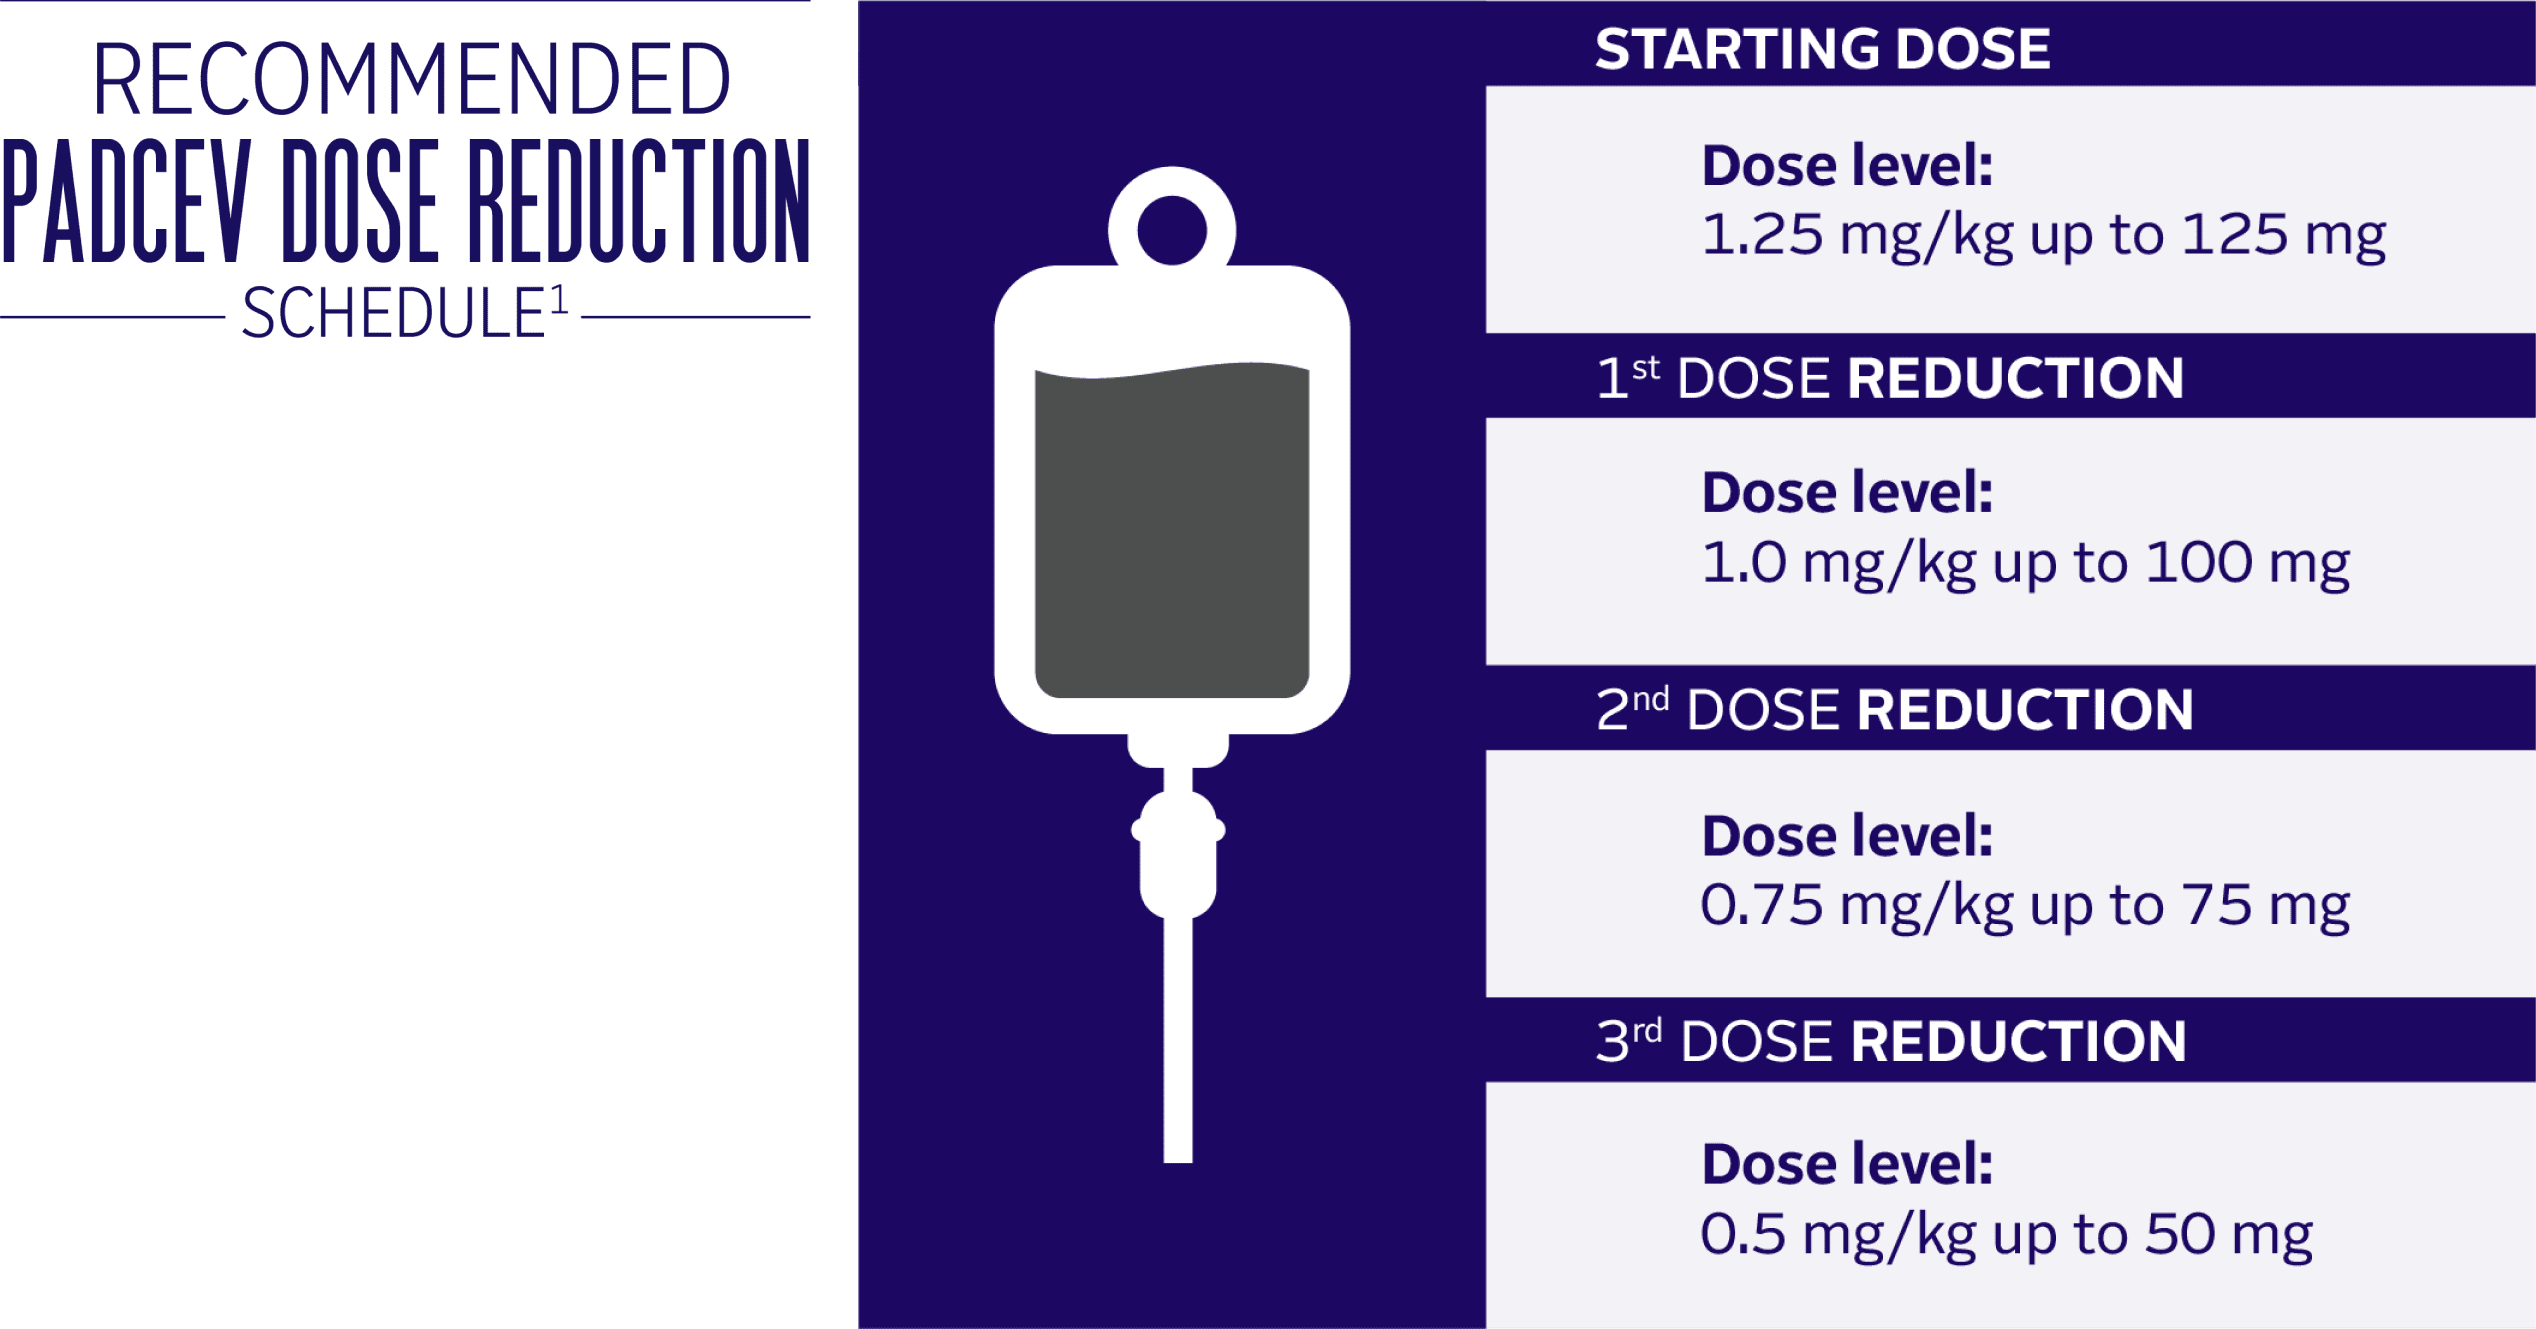 Dose reduction schedule.